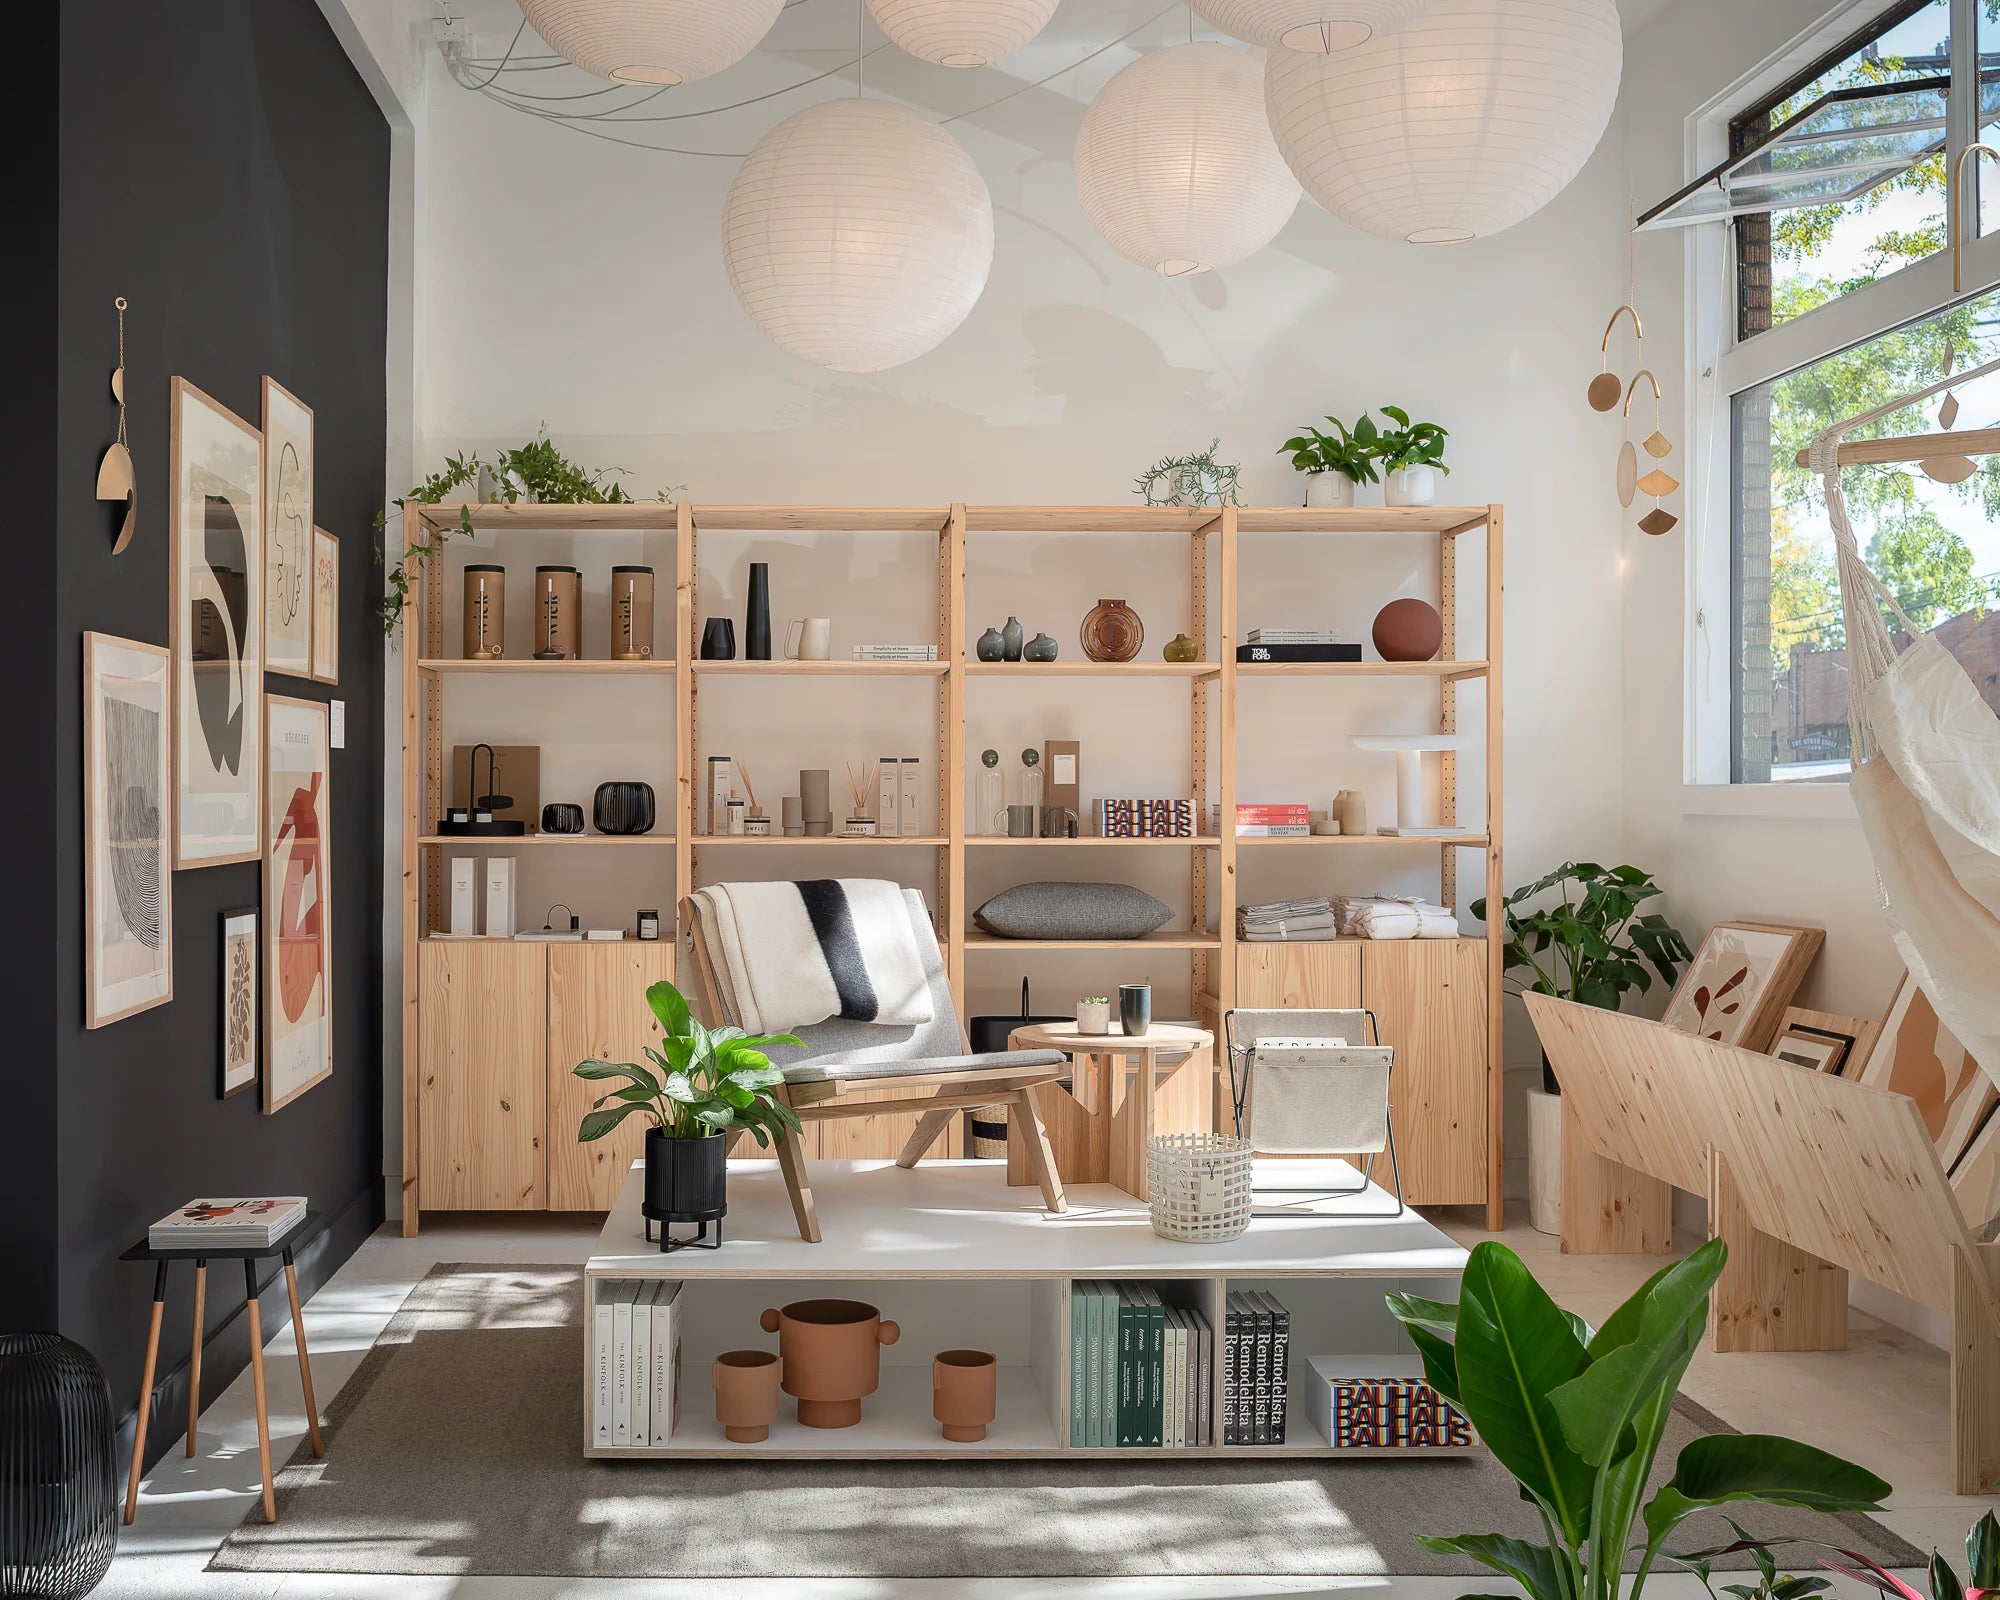 Woodland Mod store scene with midcentury modern furniture and decor